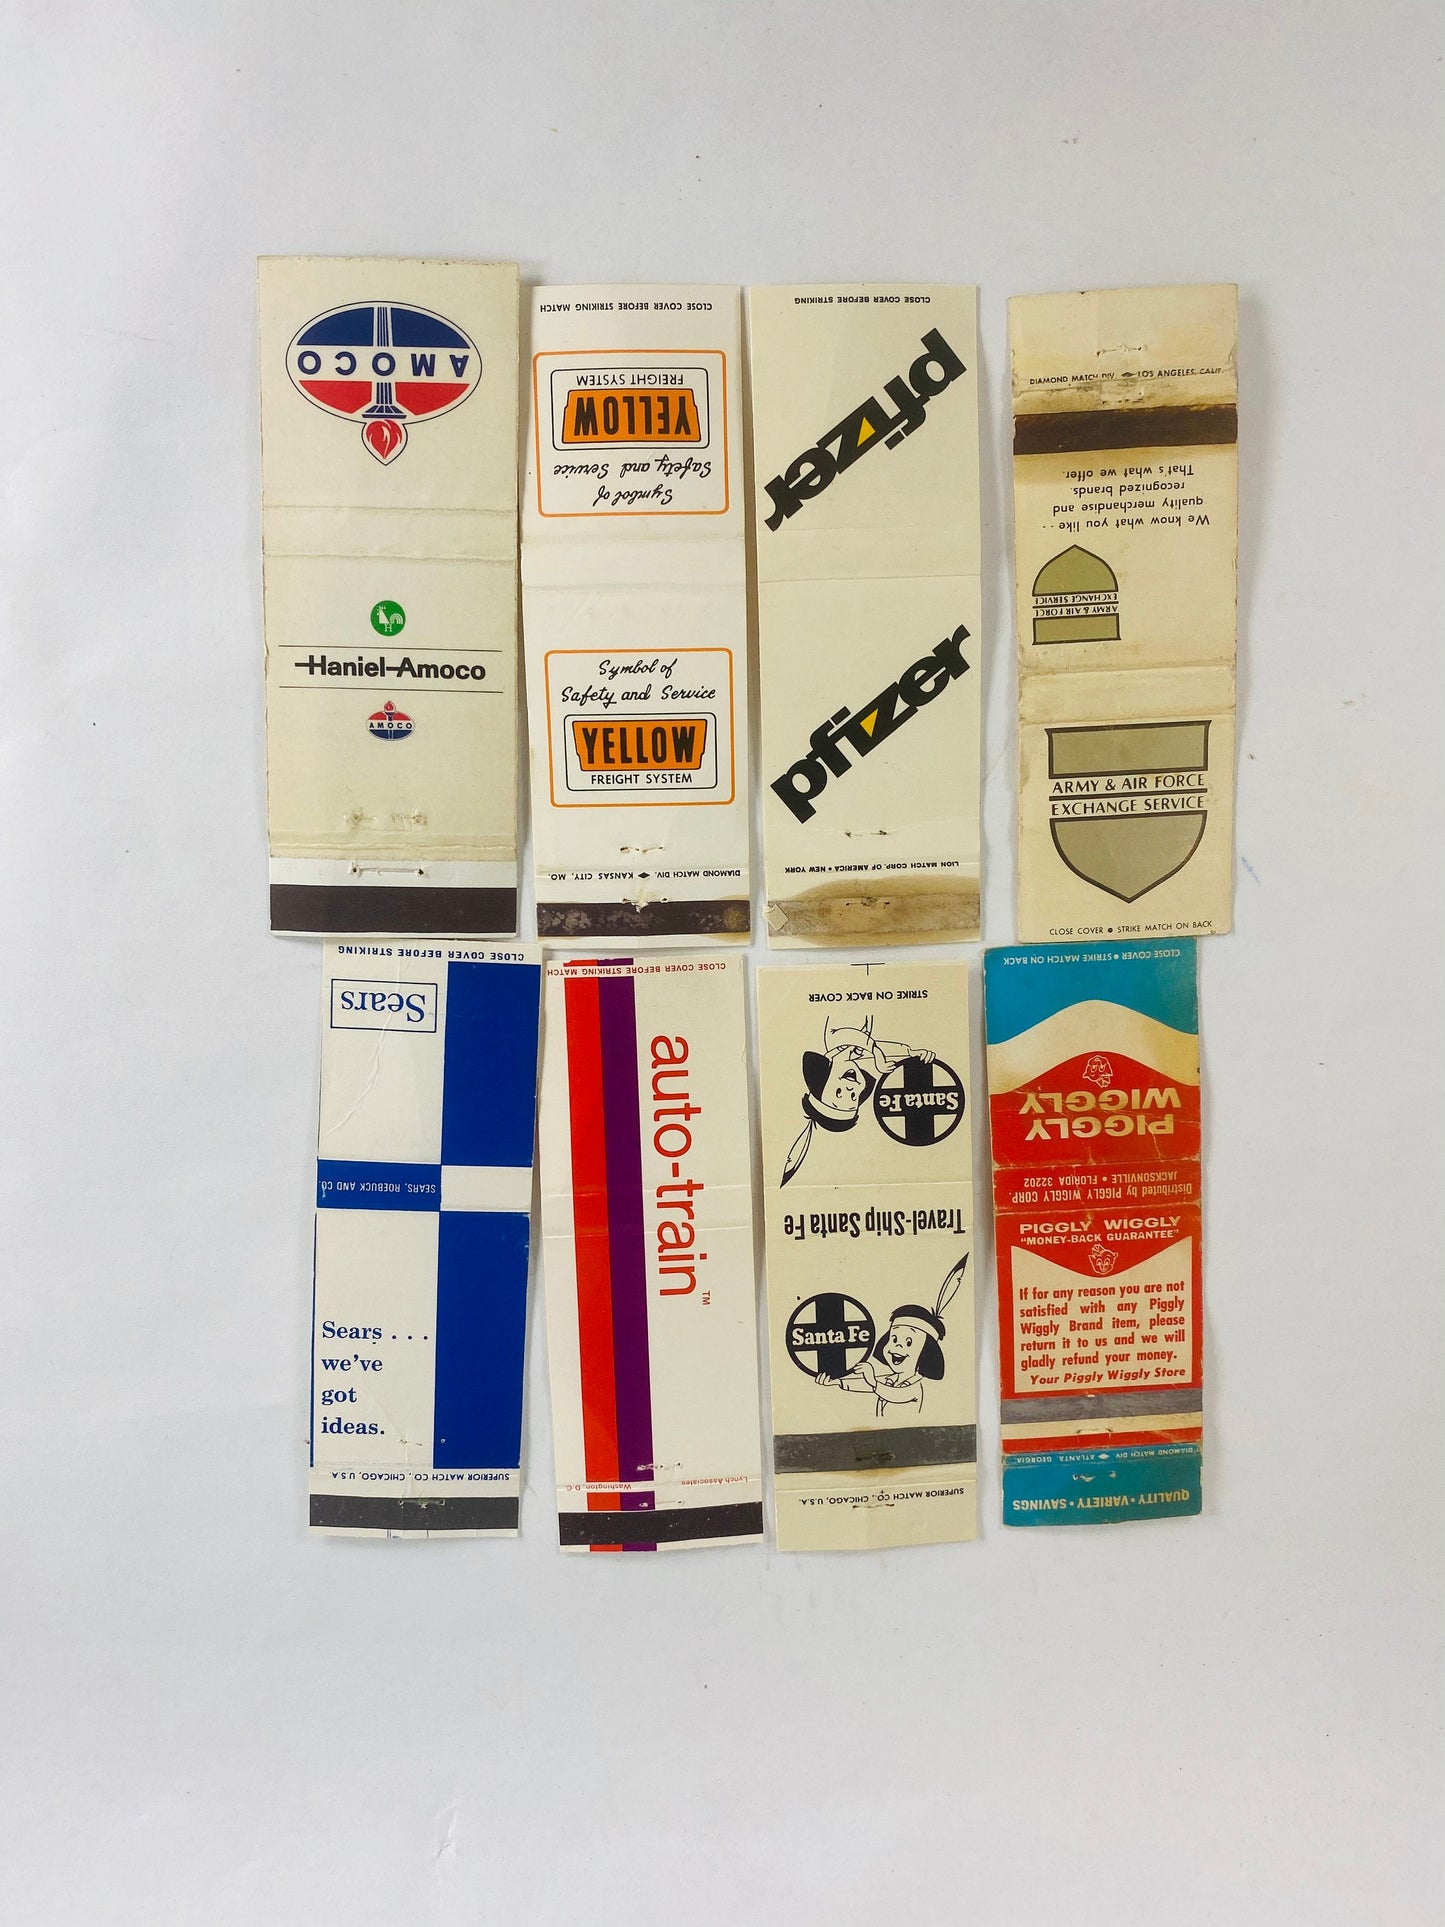 Army & Airforce Exchange Amoco Piggly Wiggly Pfizer Sears Vintage Matchbook cover lot Yellow Freight Auto-Train Merchant advertising